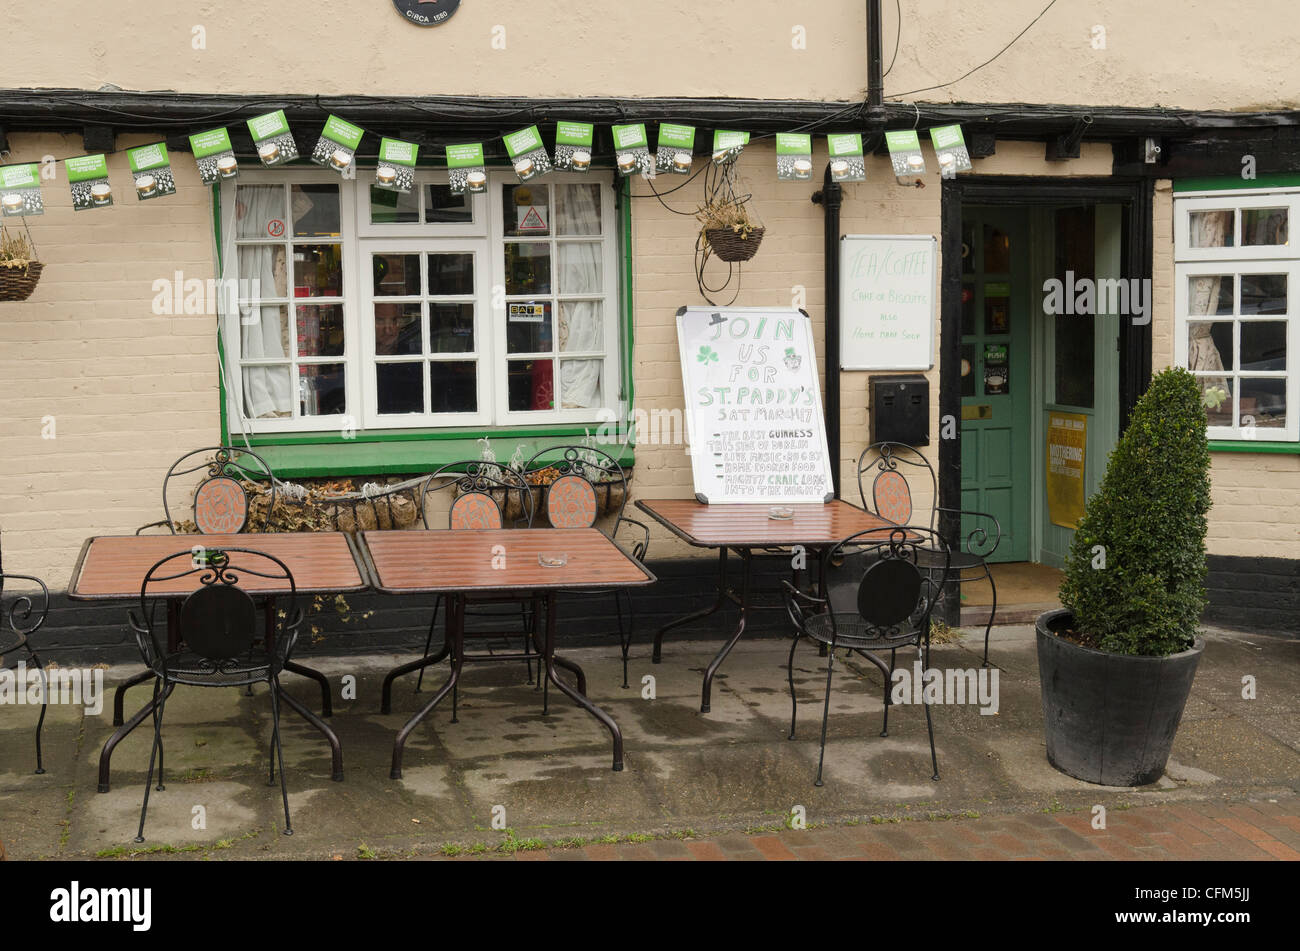 St Patrick's day decorations outside a pub in Chalfont St Giles Bucks UK. Stock Photo